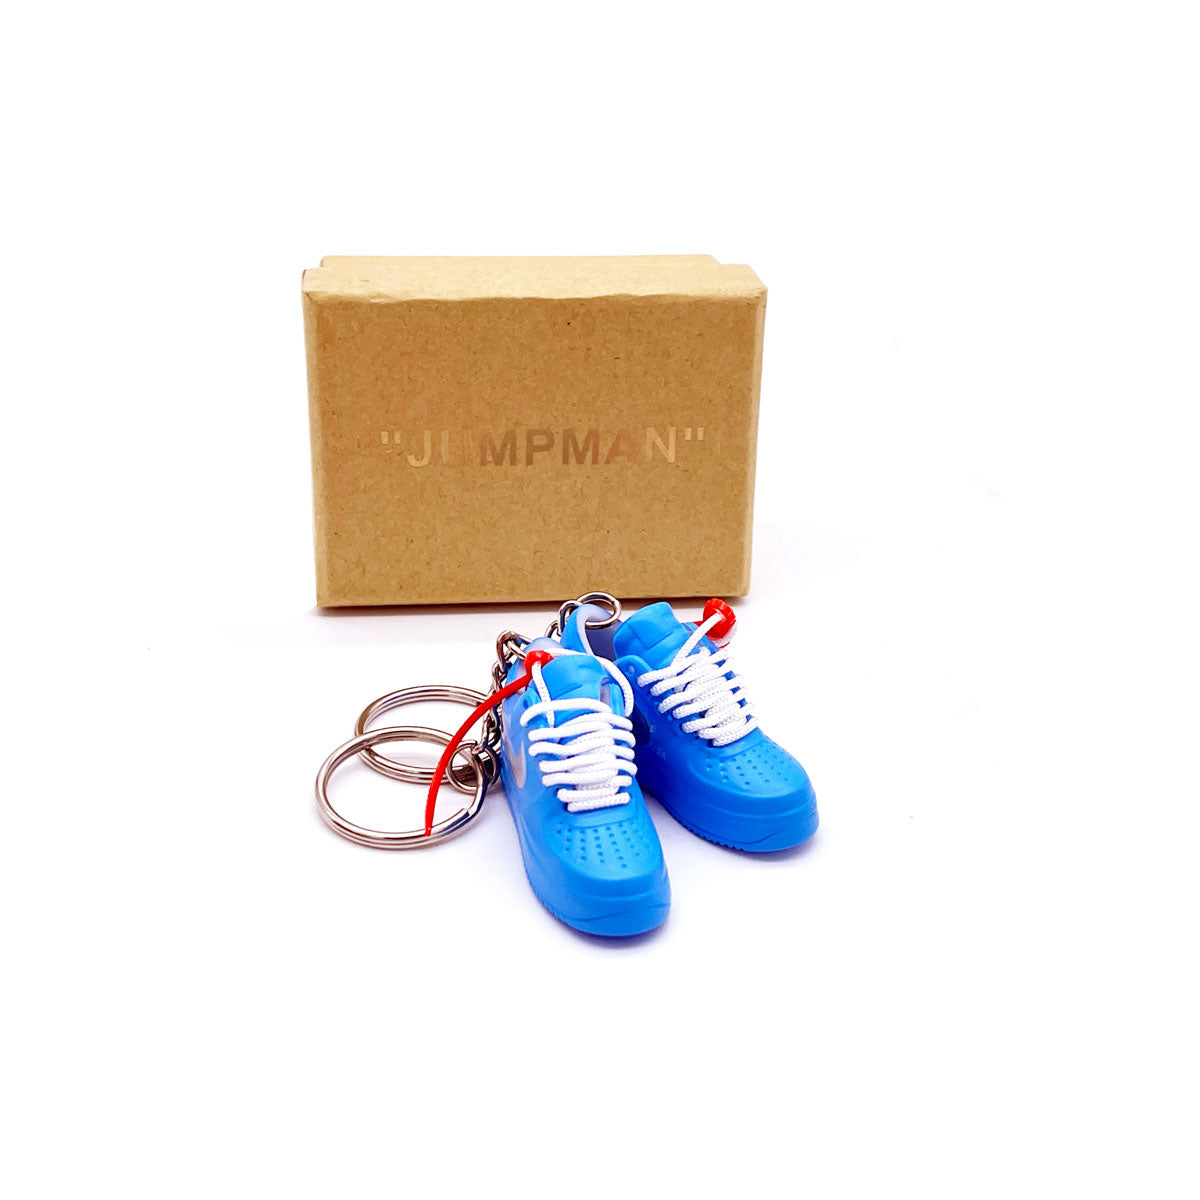 Air Force 1 x Off-White Brooklyn - Sneakers 3D Keychain – VNDS Kicks